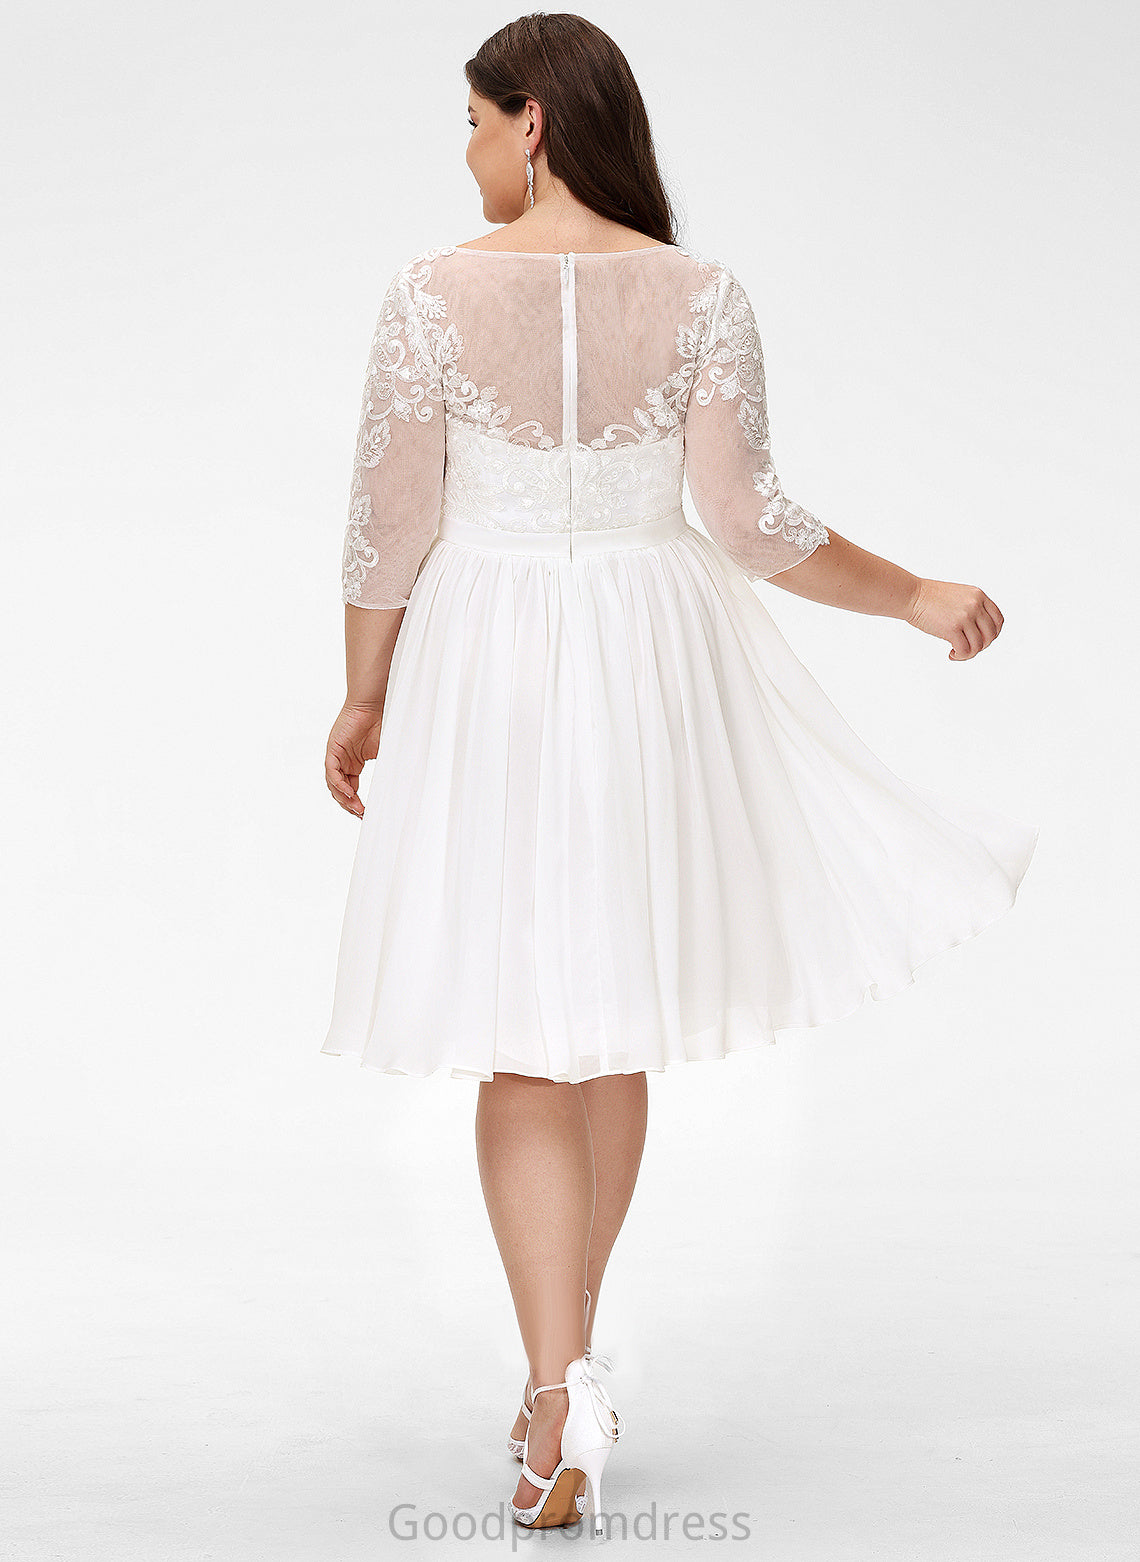 Lace Chiffon Wedding Dresses Dress Wedding Sequins Scoop Knee-Length A-Line With Jacqueline